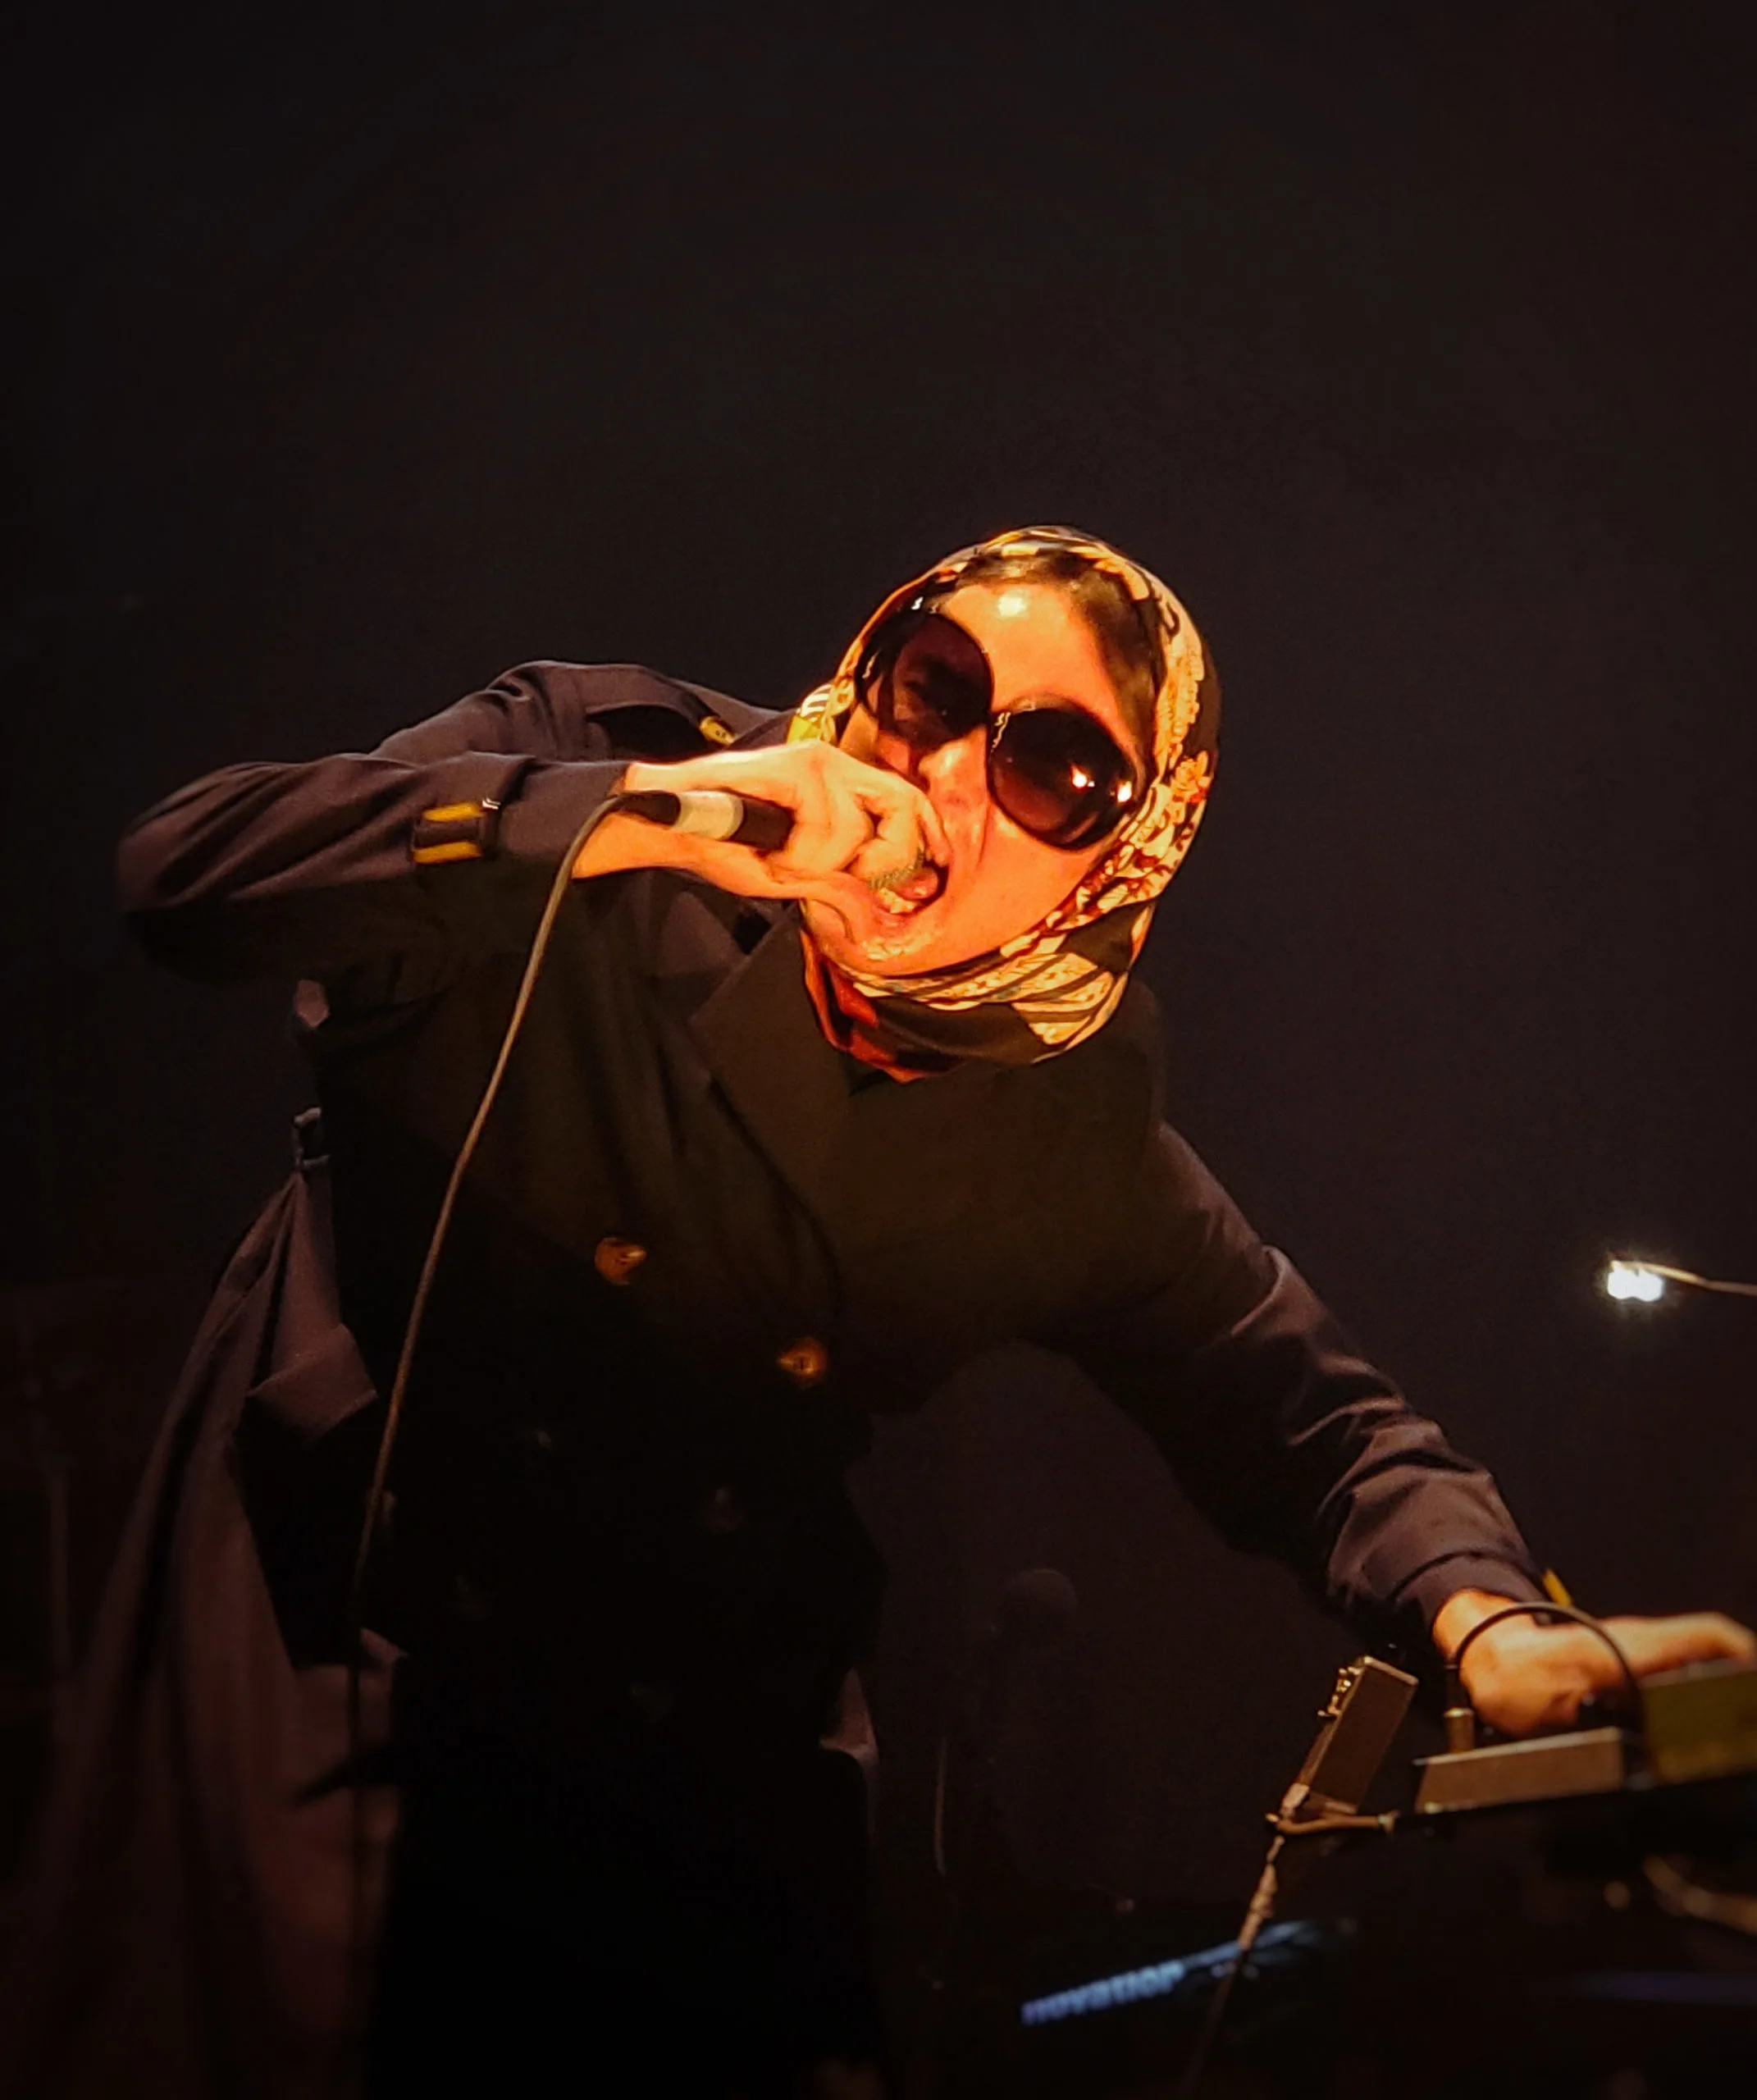 Gerard Way in Head Scarf and sunglasses